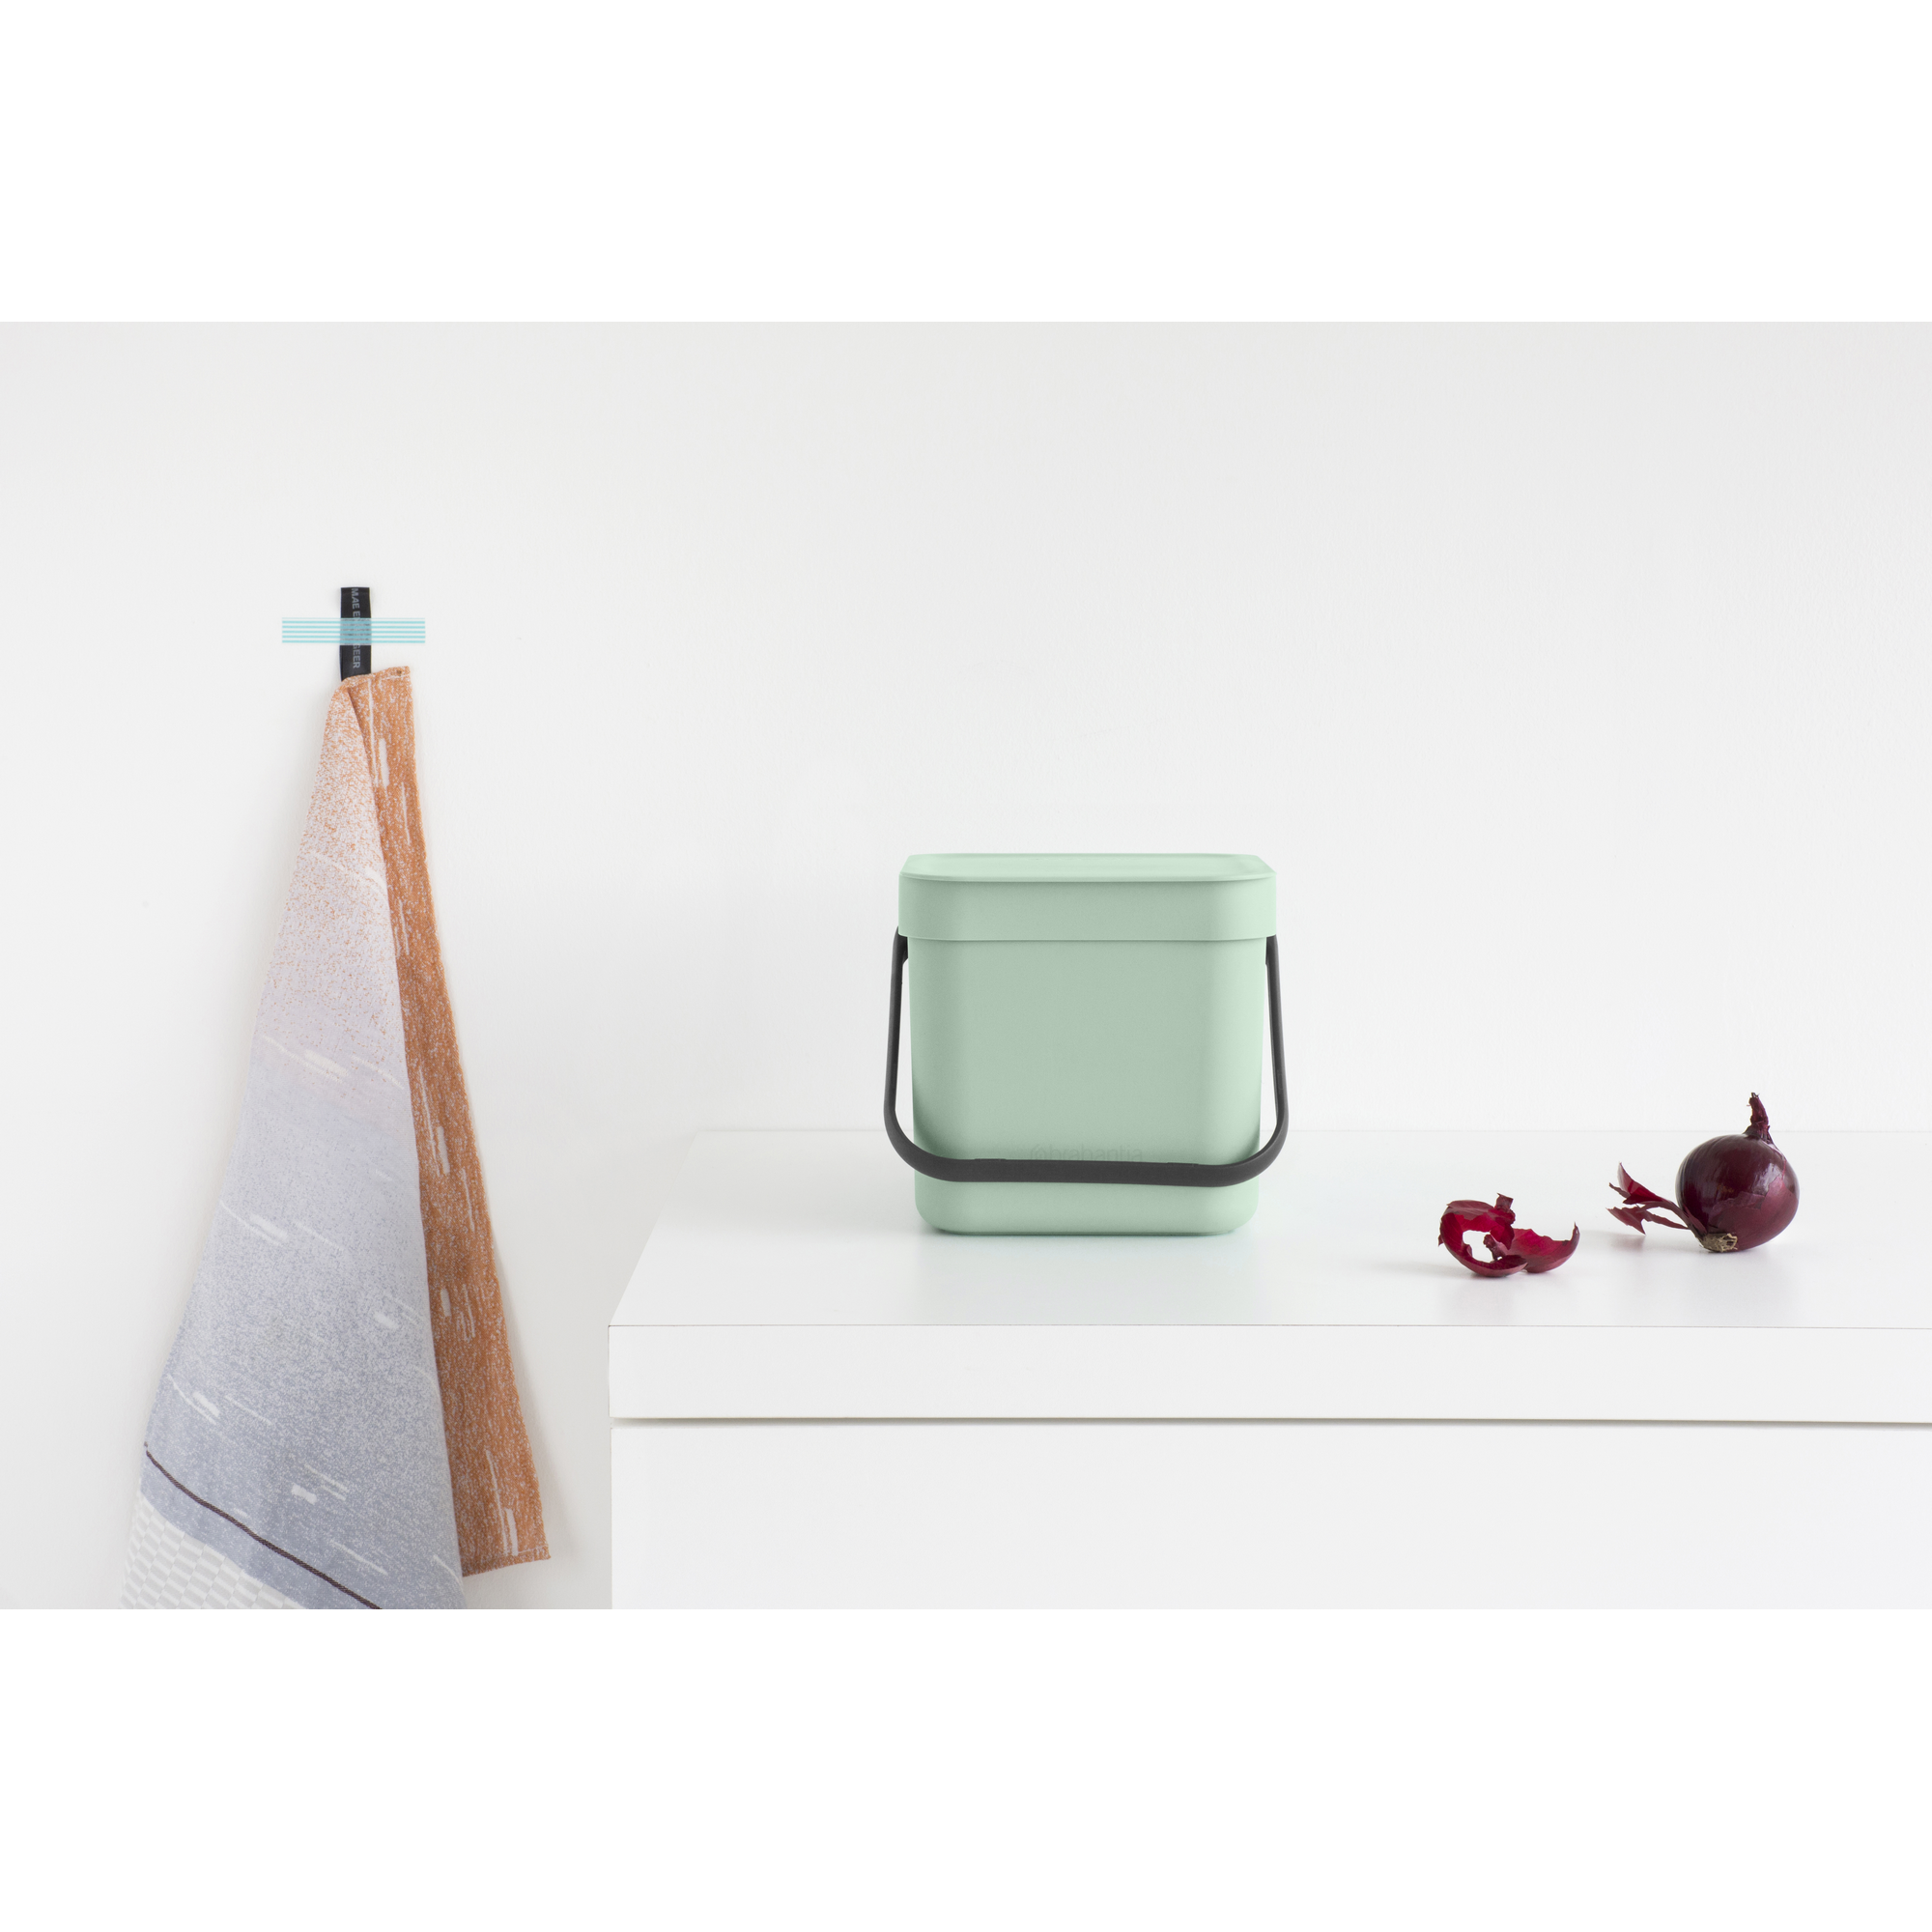 Abfallbehälter 'Sort & Go' 6 l jade green + product picture